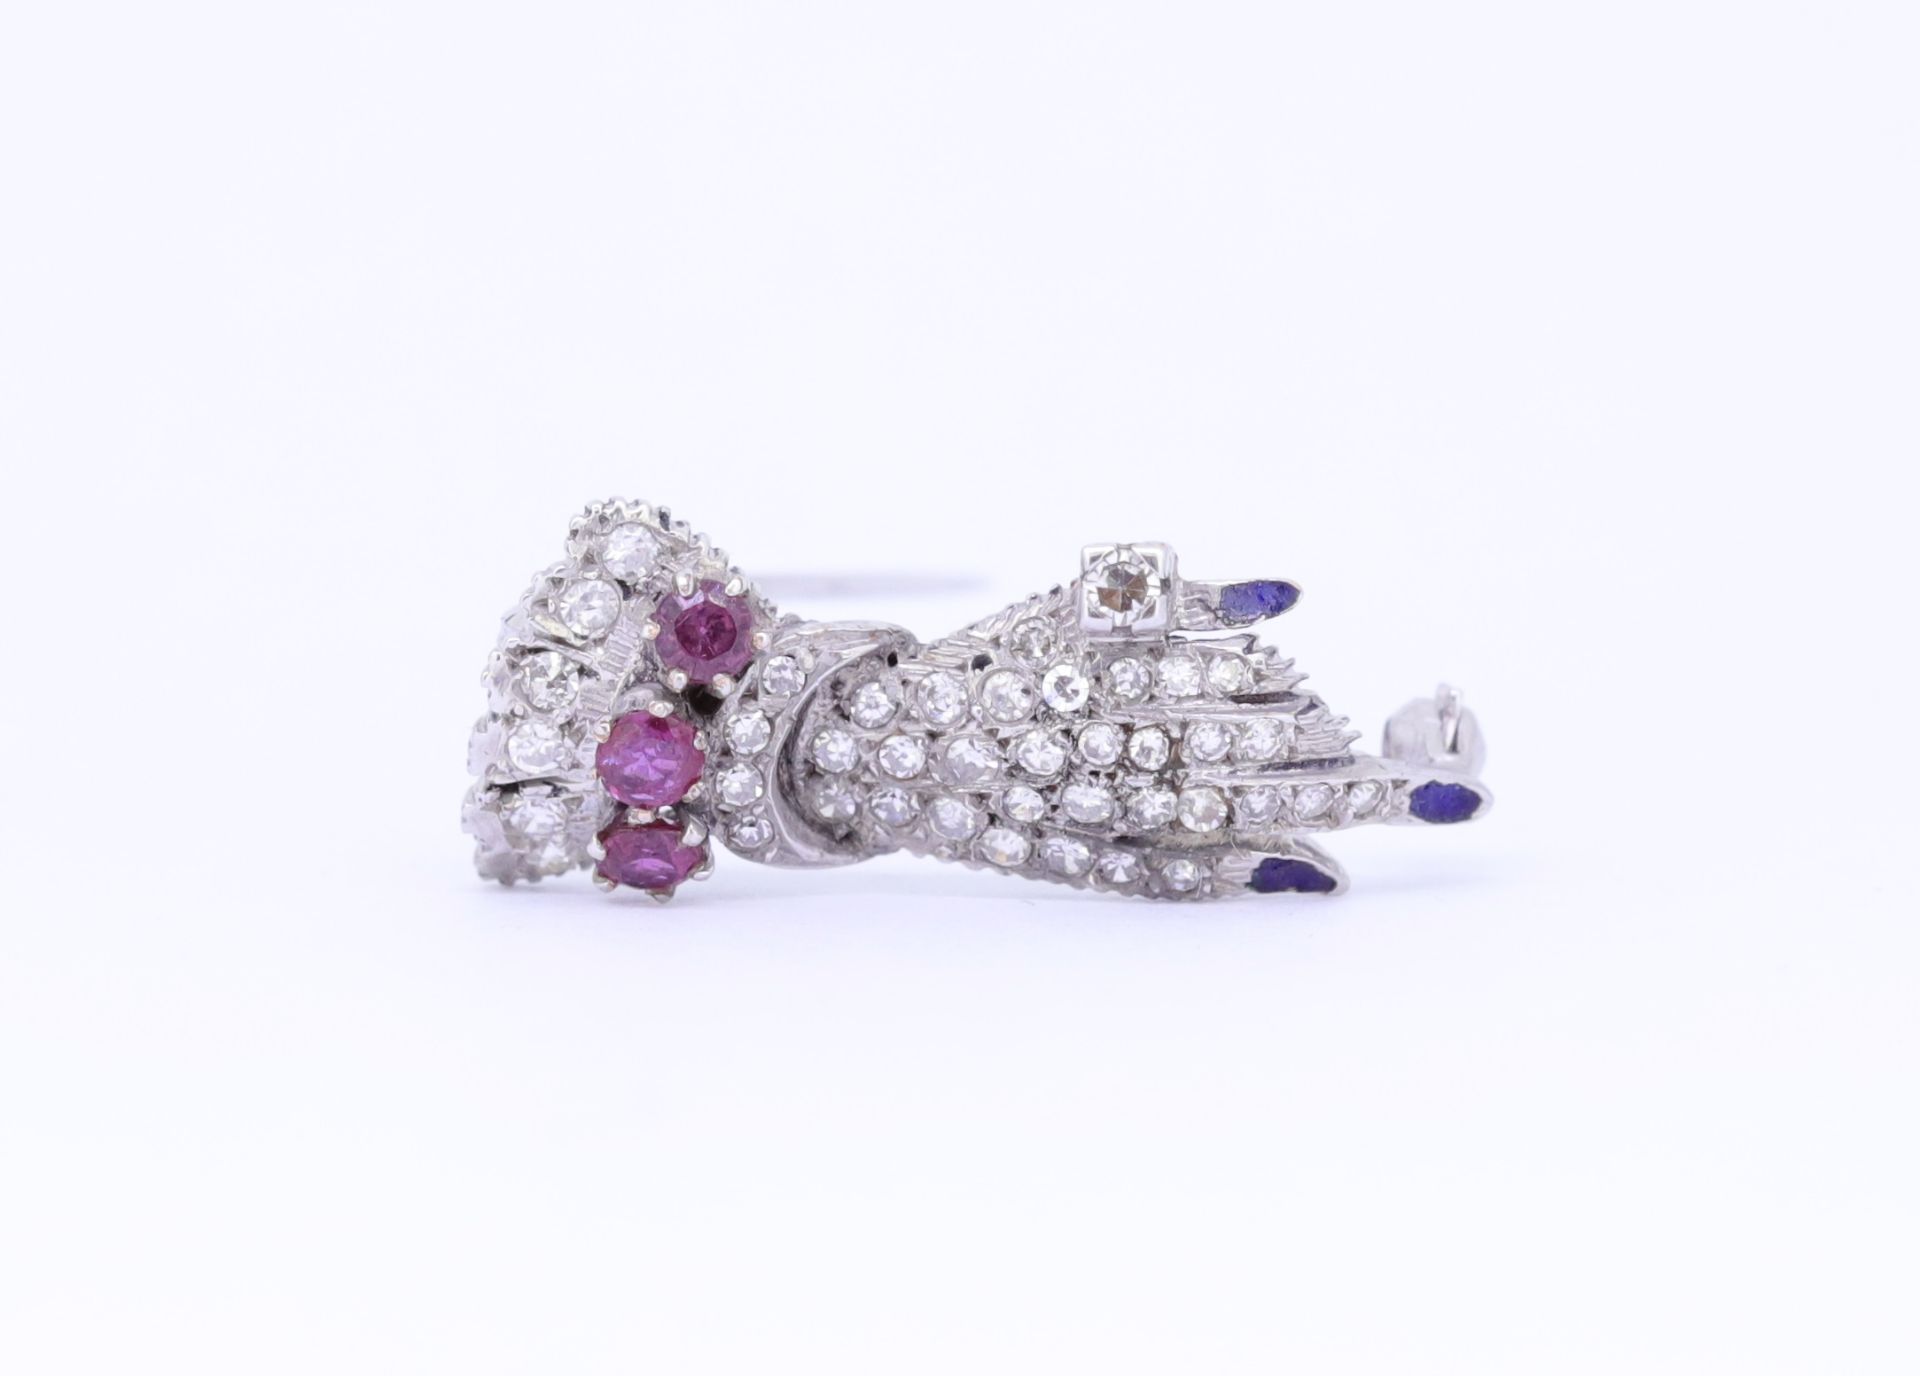 ANTIQUE DIAMOND SAPPHIRE AND RUBY HAND BROOCH